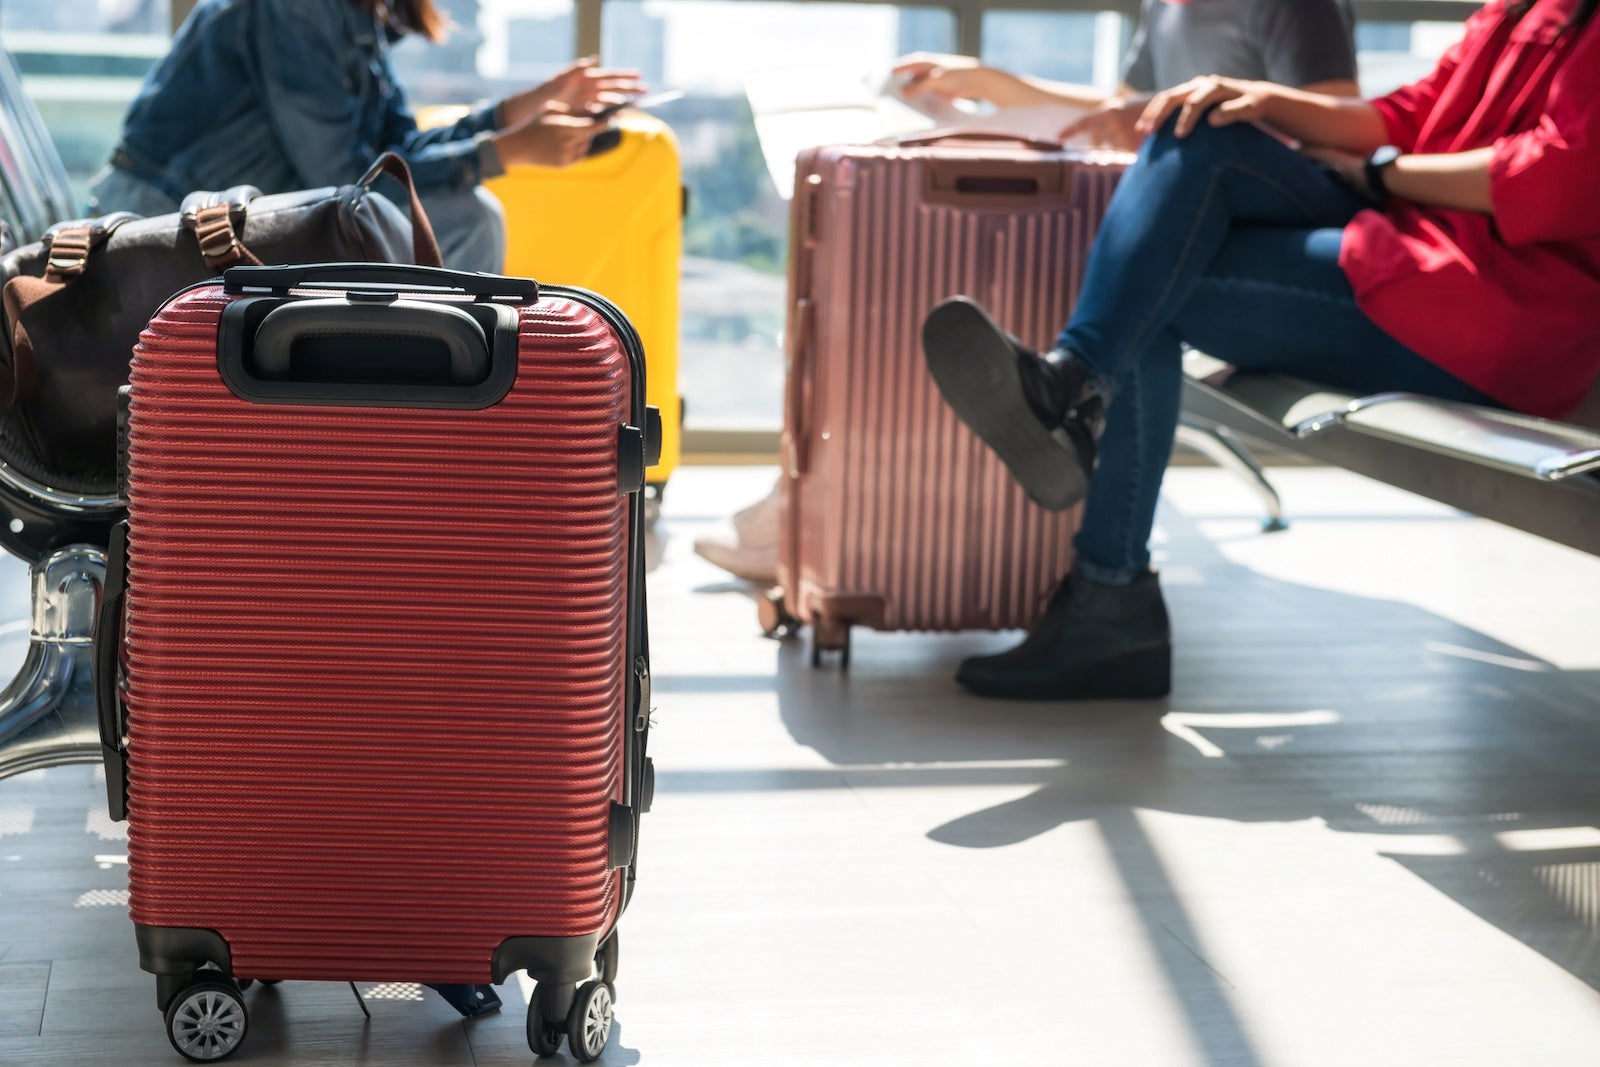 Carry-on Luggage Sizes and Weight Limits by Airline